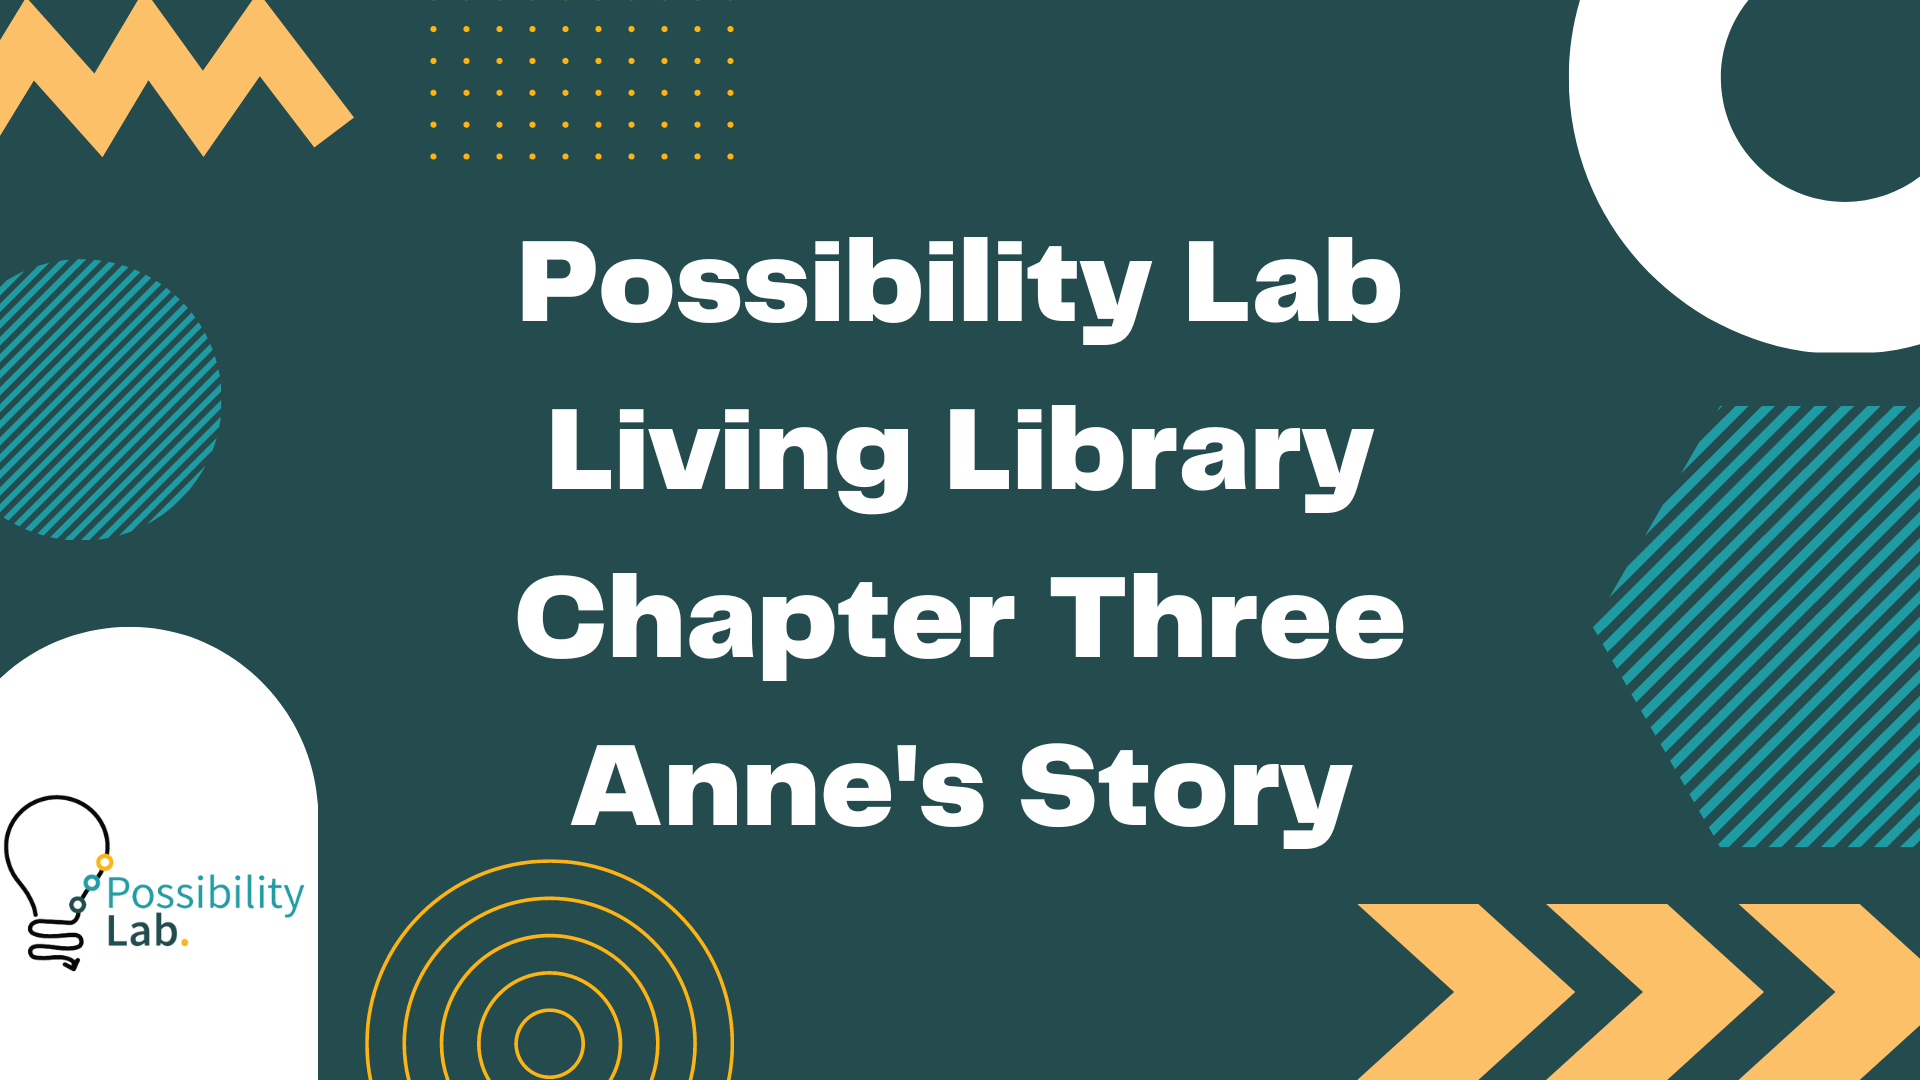 A slide from our living library videos. It has a green background and squiggle designs in white, lighter green and orange. The possibility lab logo is on the bottom left and text on the slide reads Possibility Lab Living Library Chapter Three Anne's Story